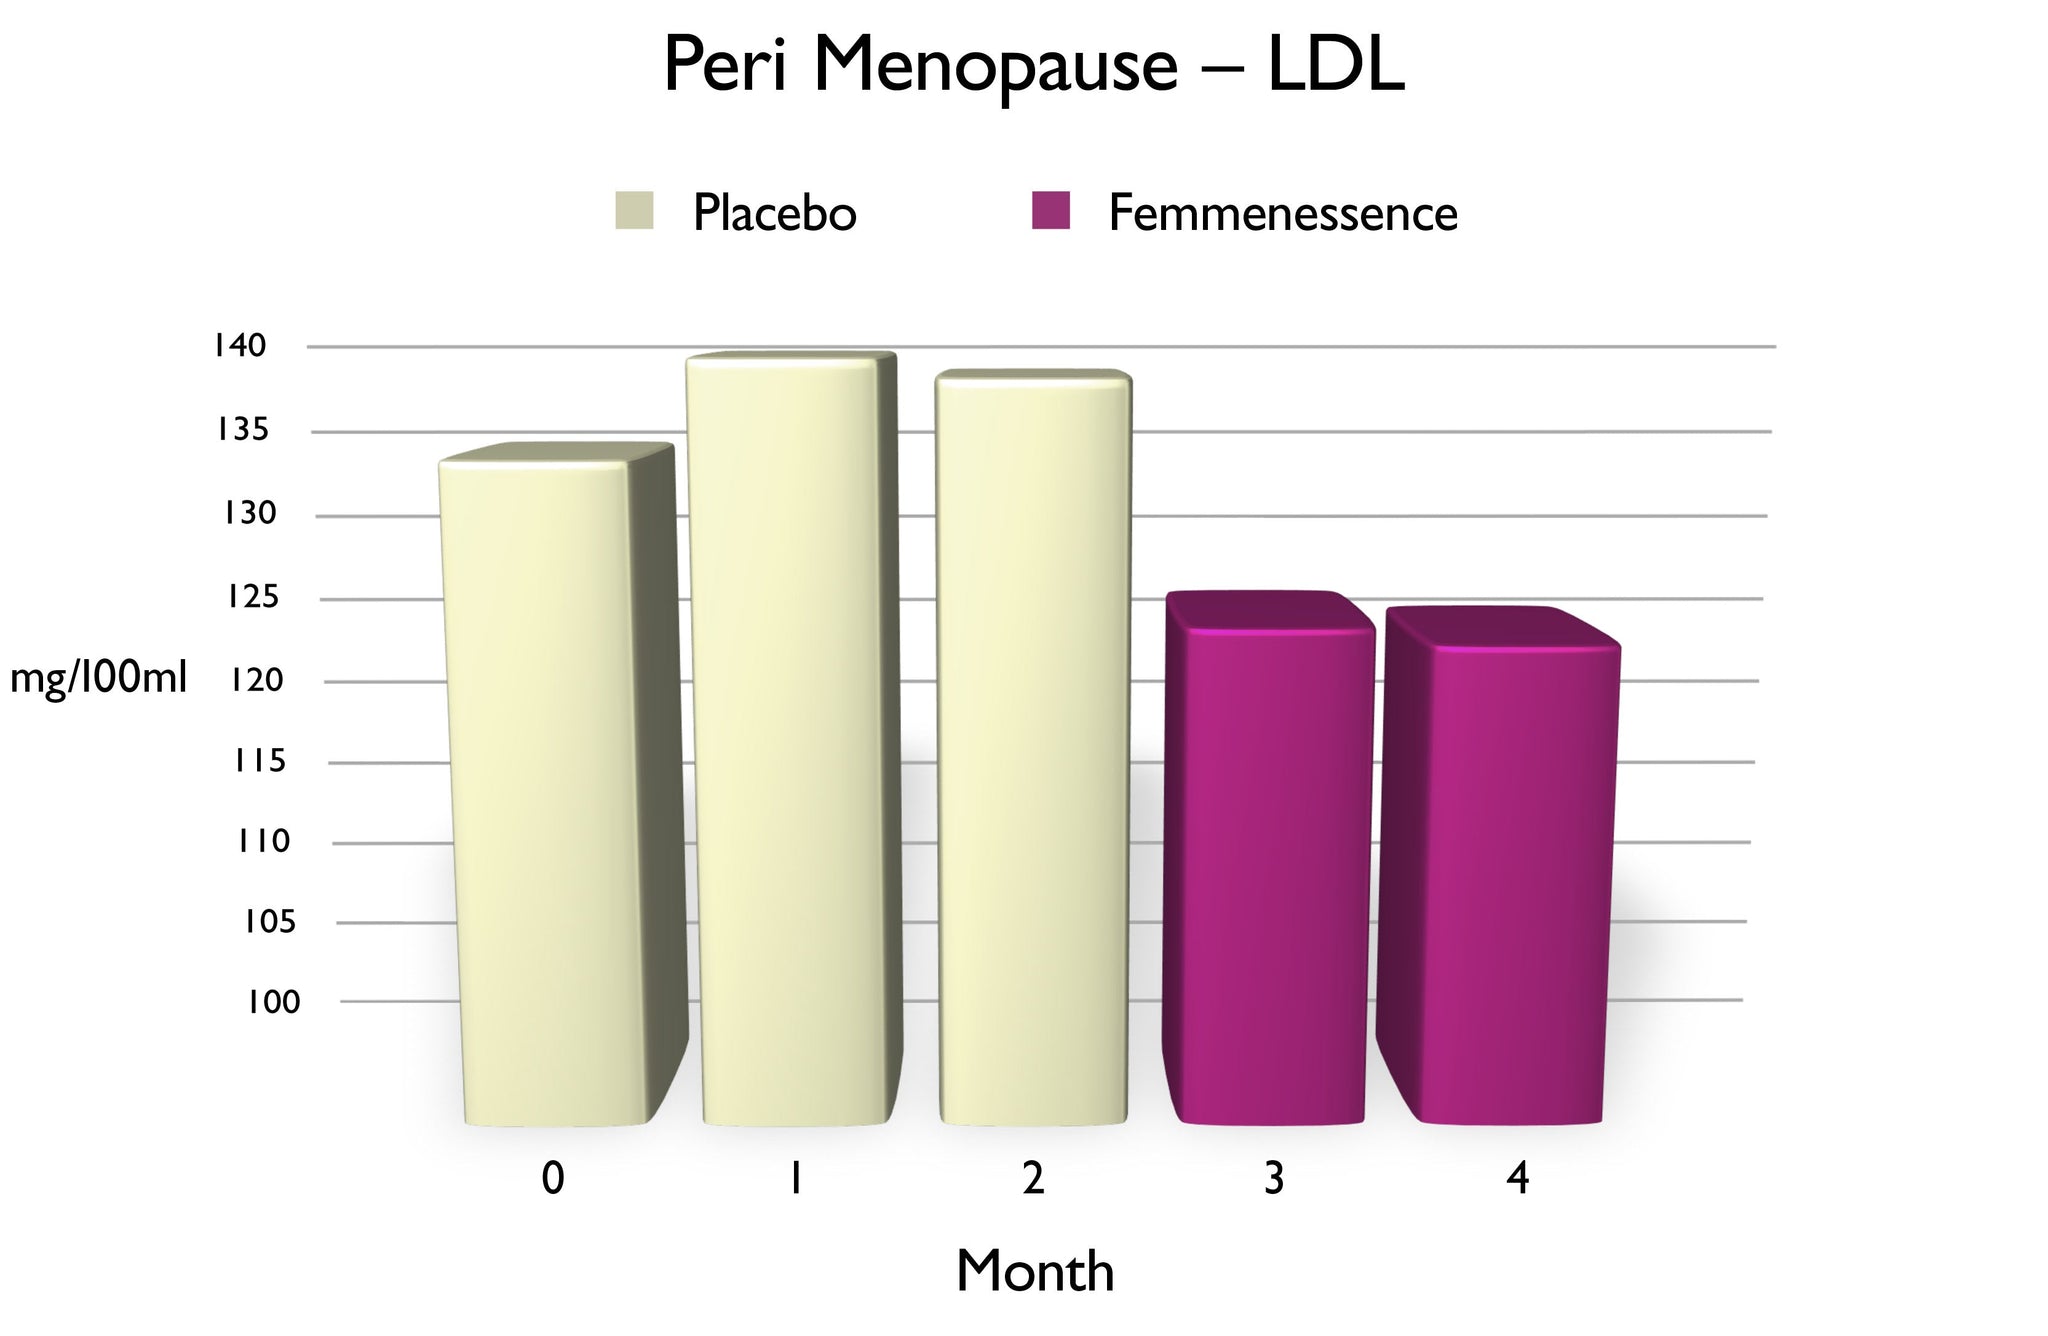 Chart of Peri Menopause LDL, using Femmenessence vs. placebo, over three-month period